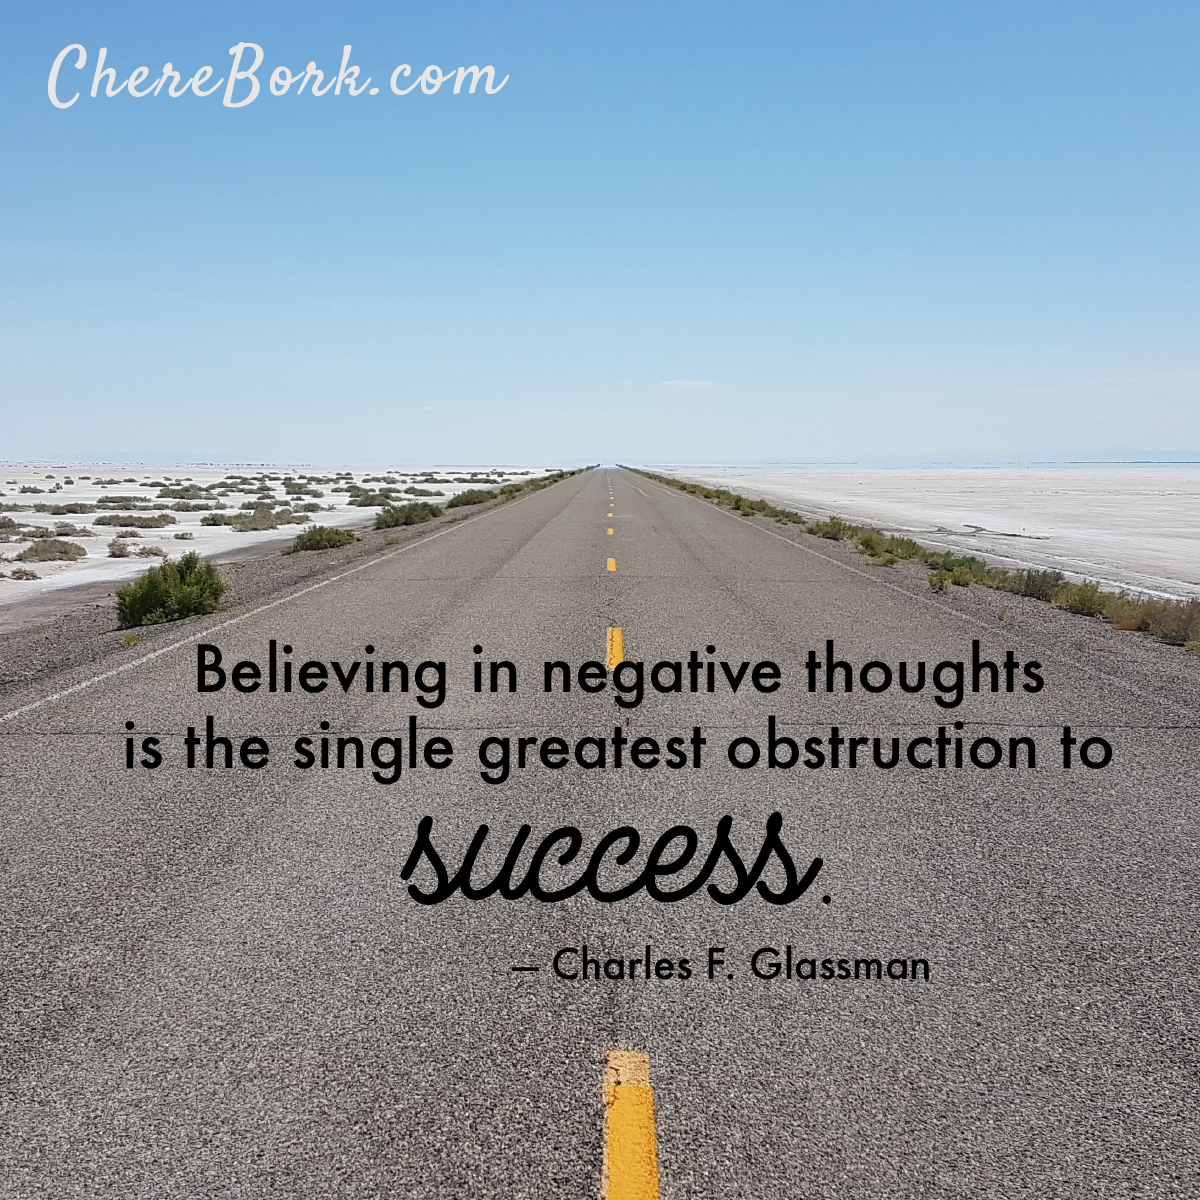 Believing in negative thoughts is the single greatest obstruction to success. -Charles F. Glassman